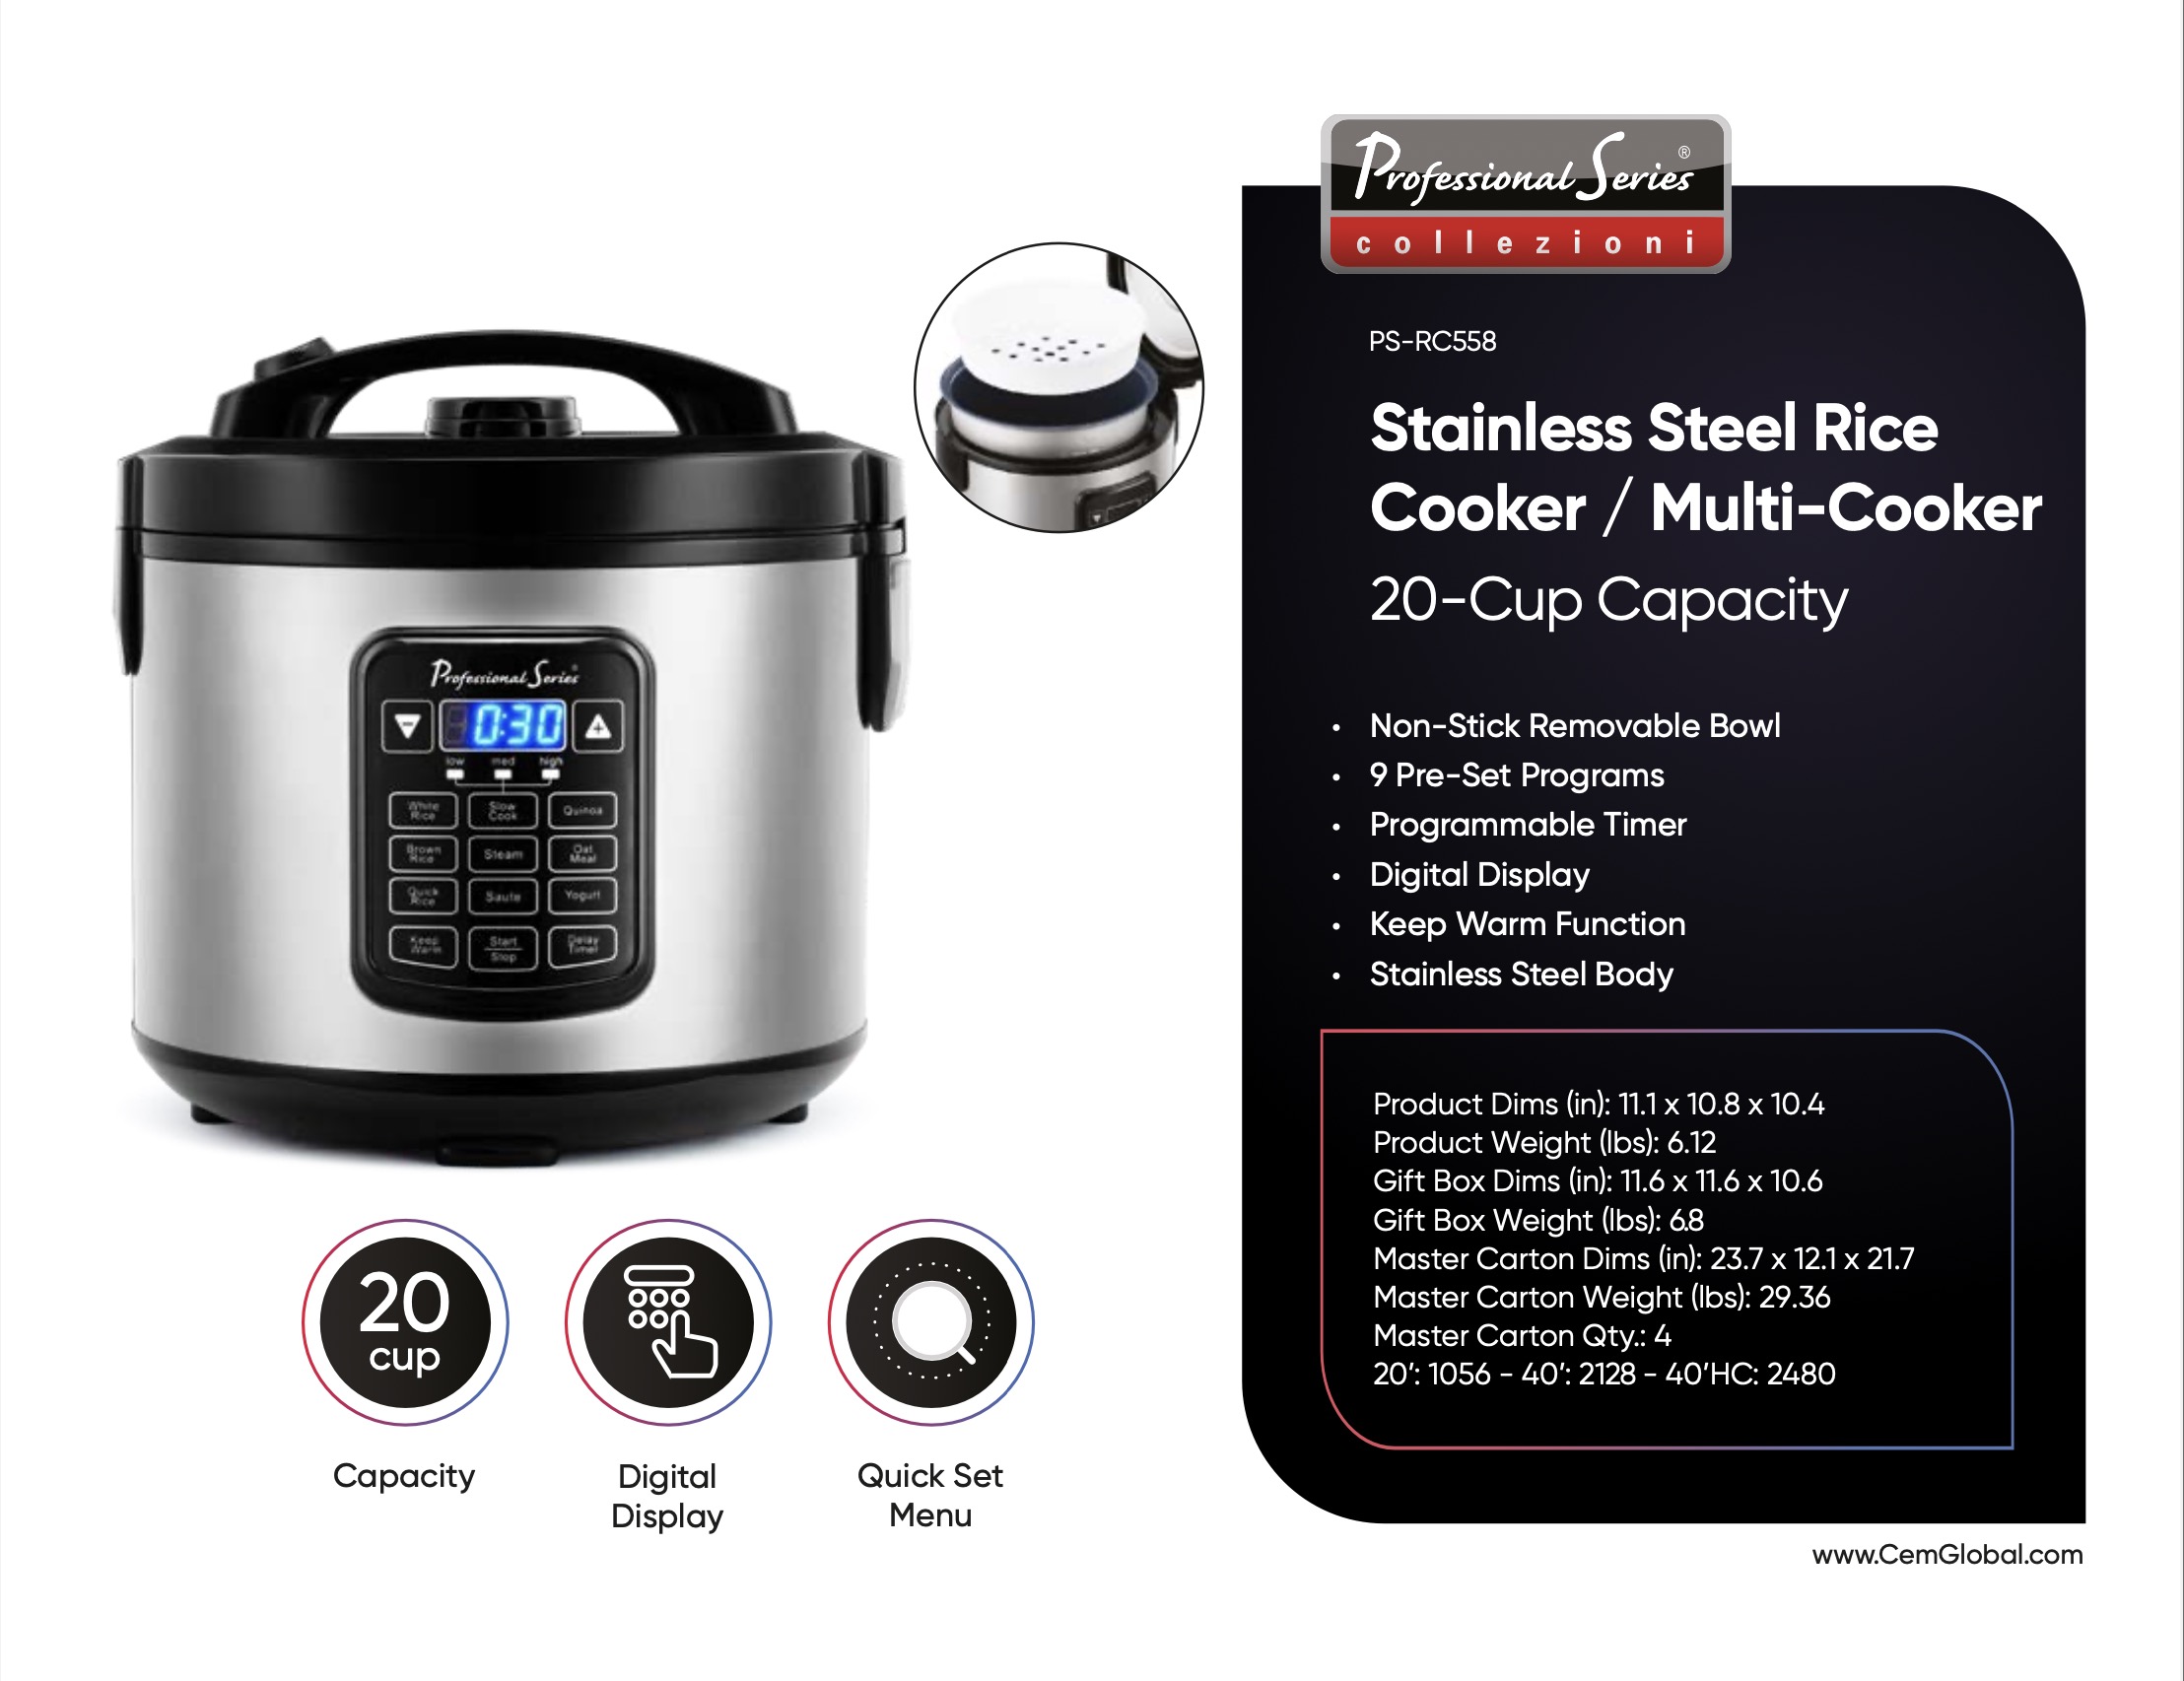 Stainless Steel Rice Cooker / Multi-Cooker 20 cup